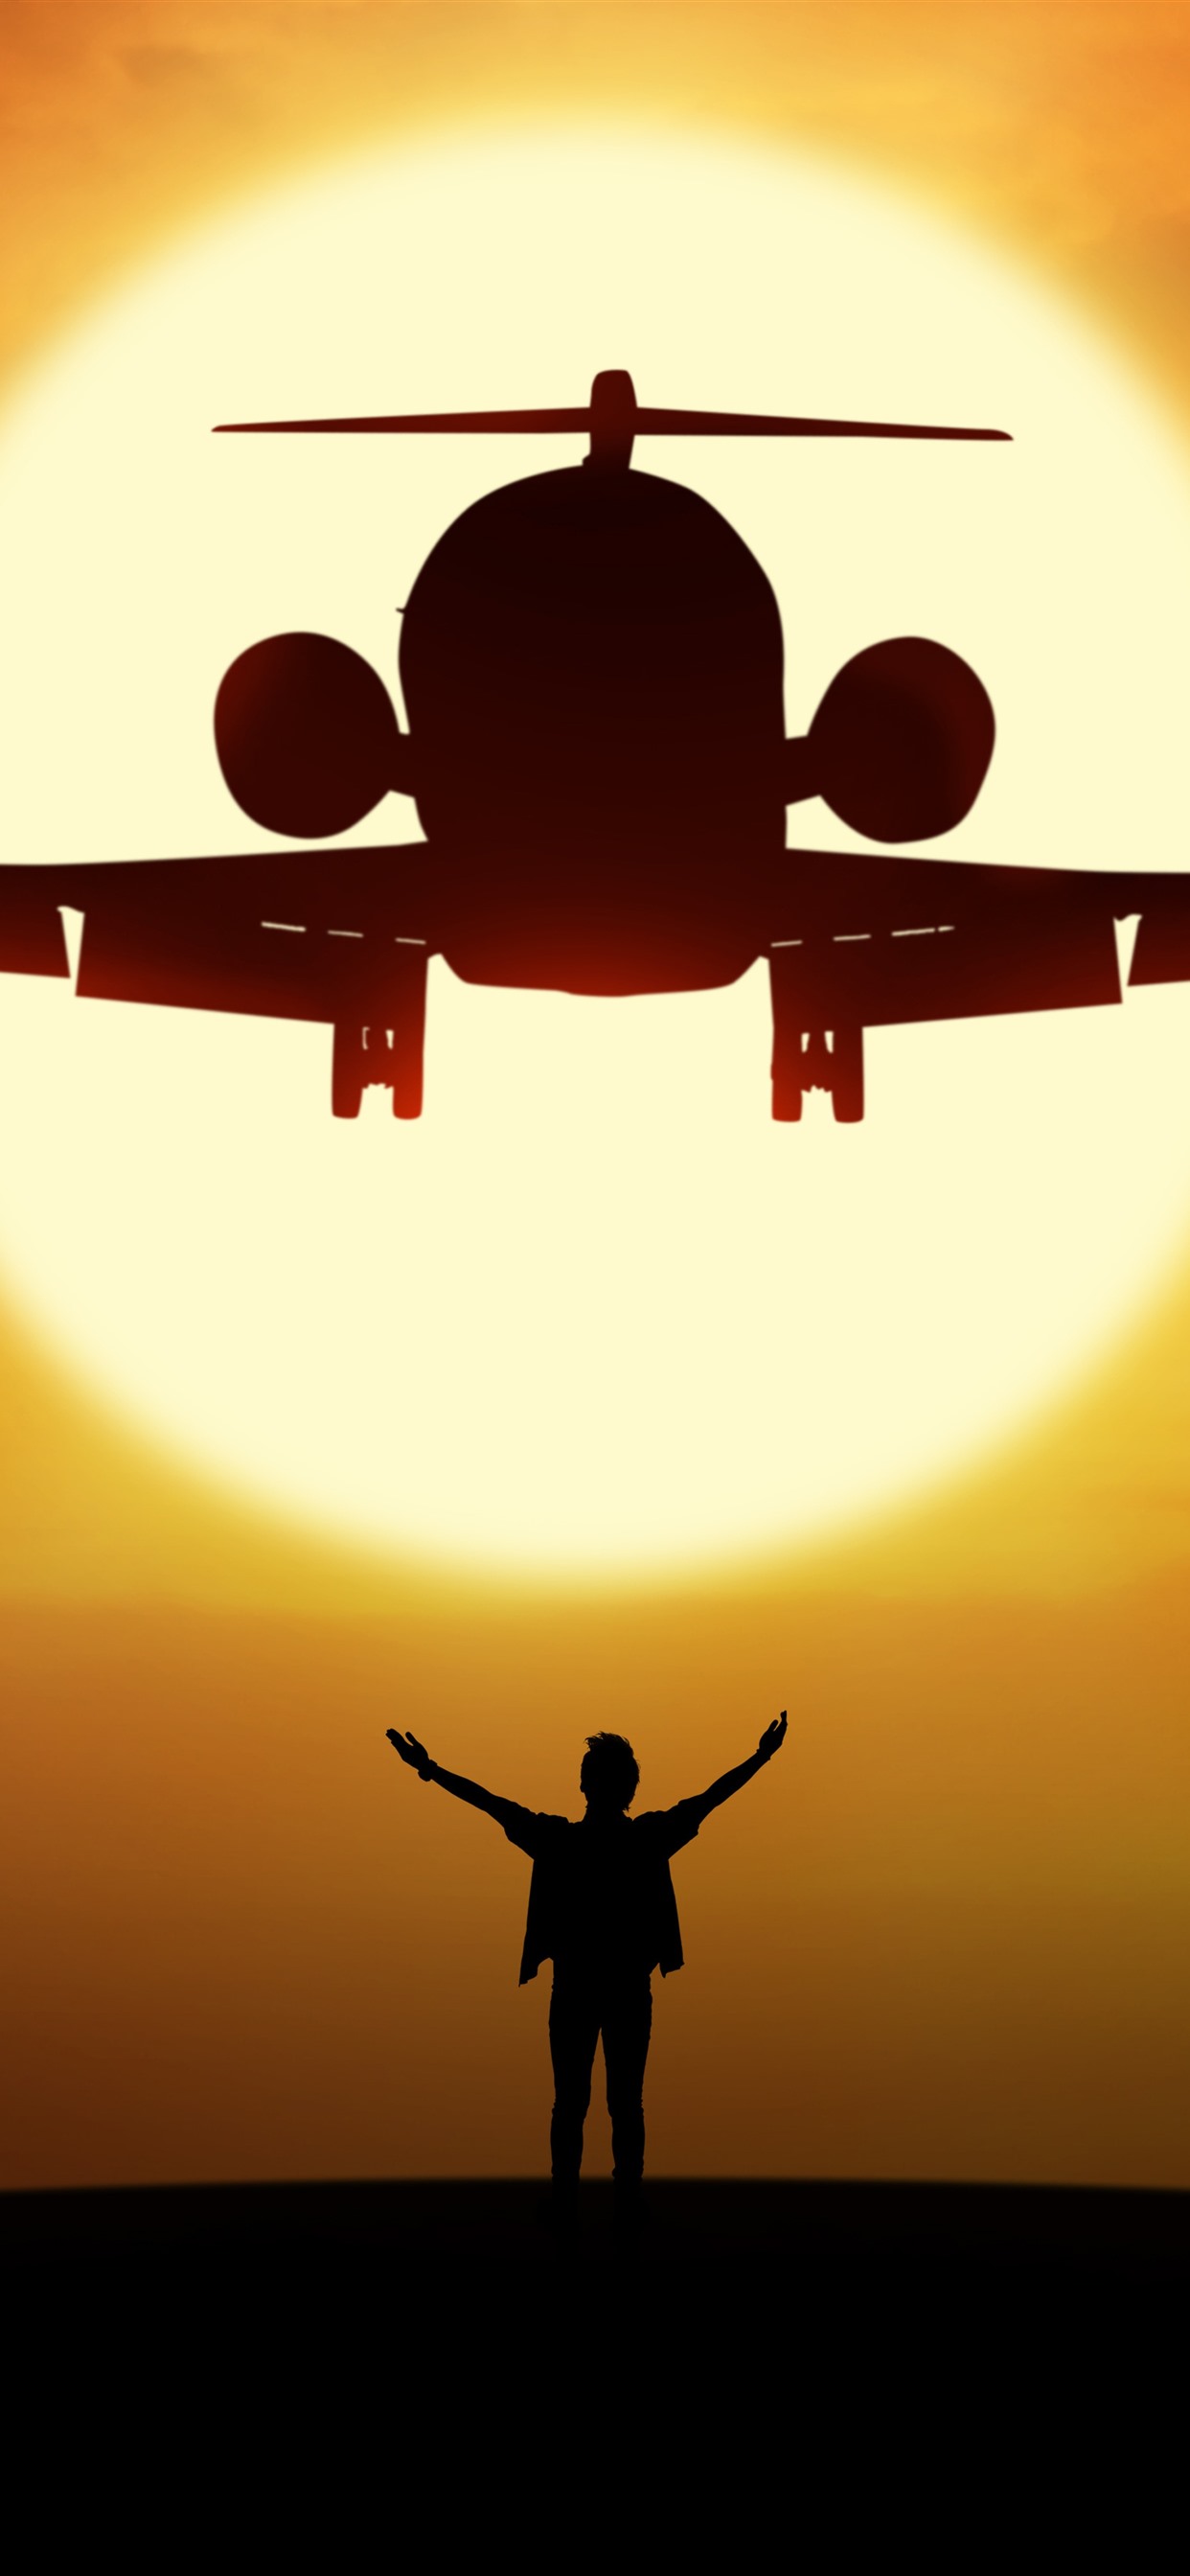 Download Iphone Wallpaper Airplane And Man, Silhouette, Sunset ...